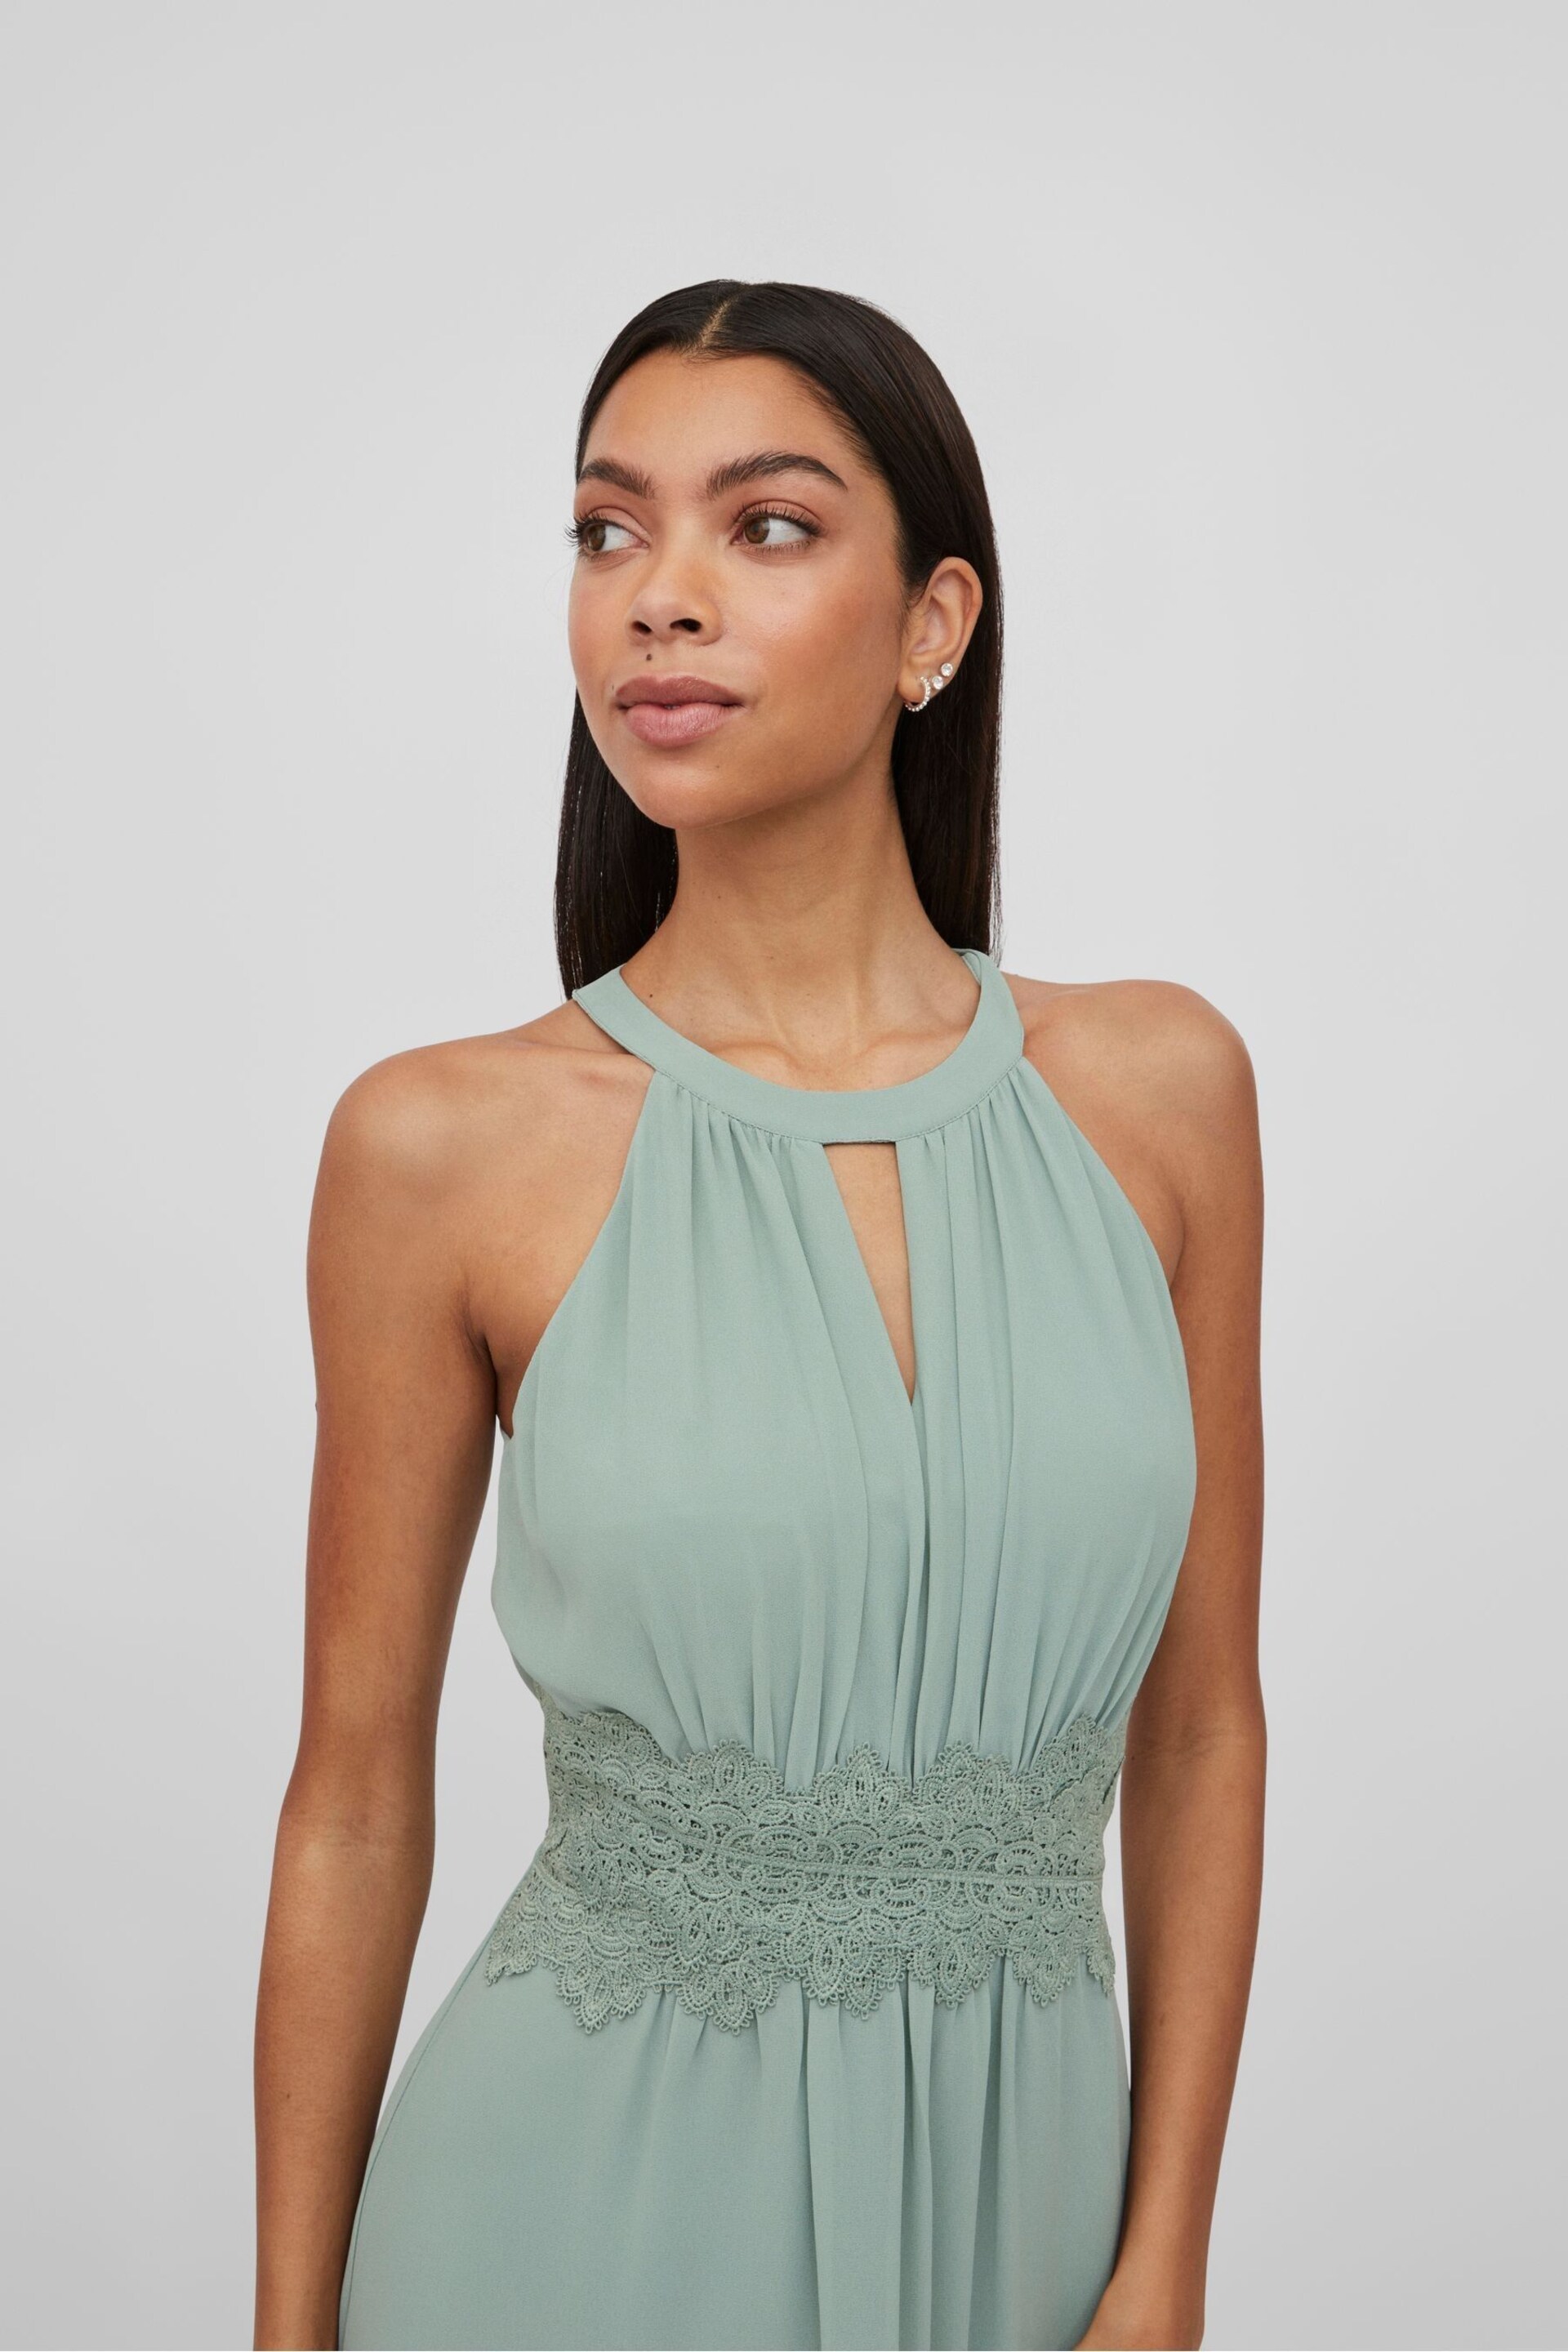 VILA Green Halter Neck Tulle Fit And Flare Dress - Image 5 of 7